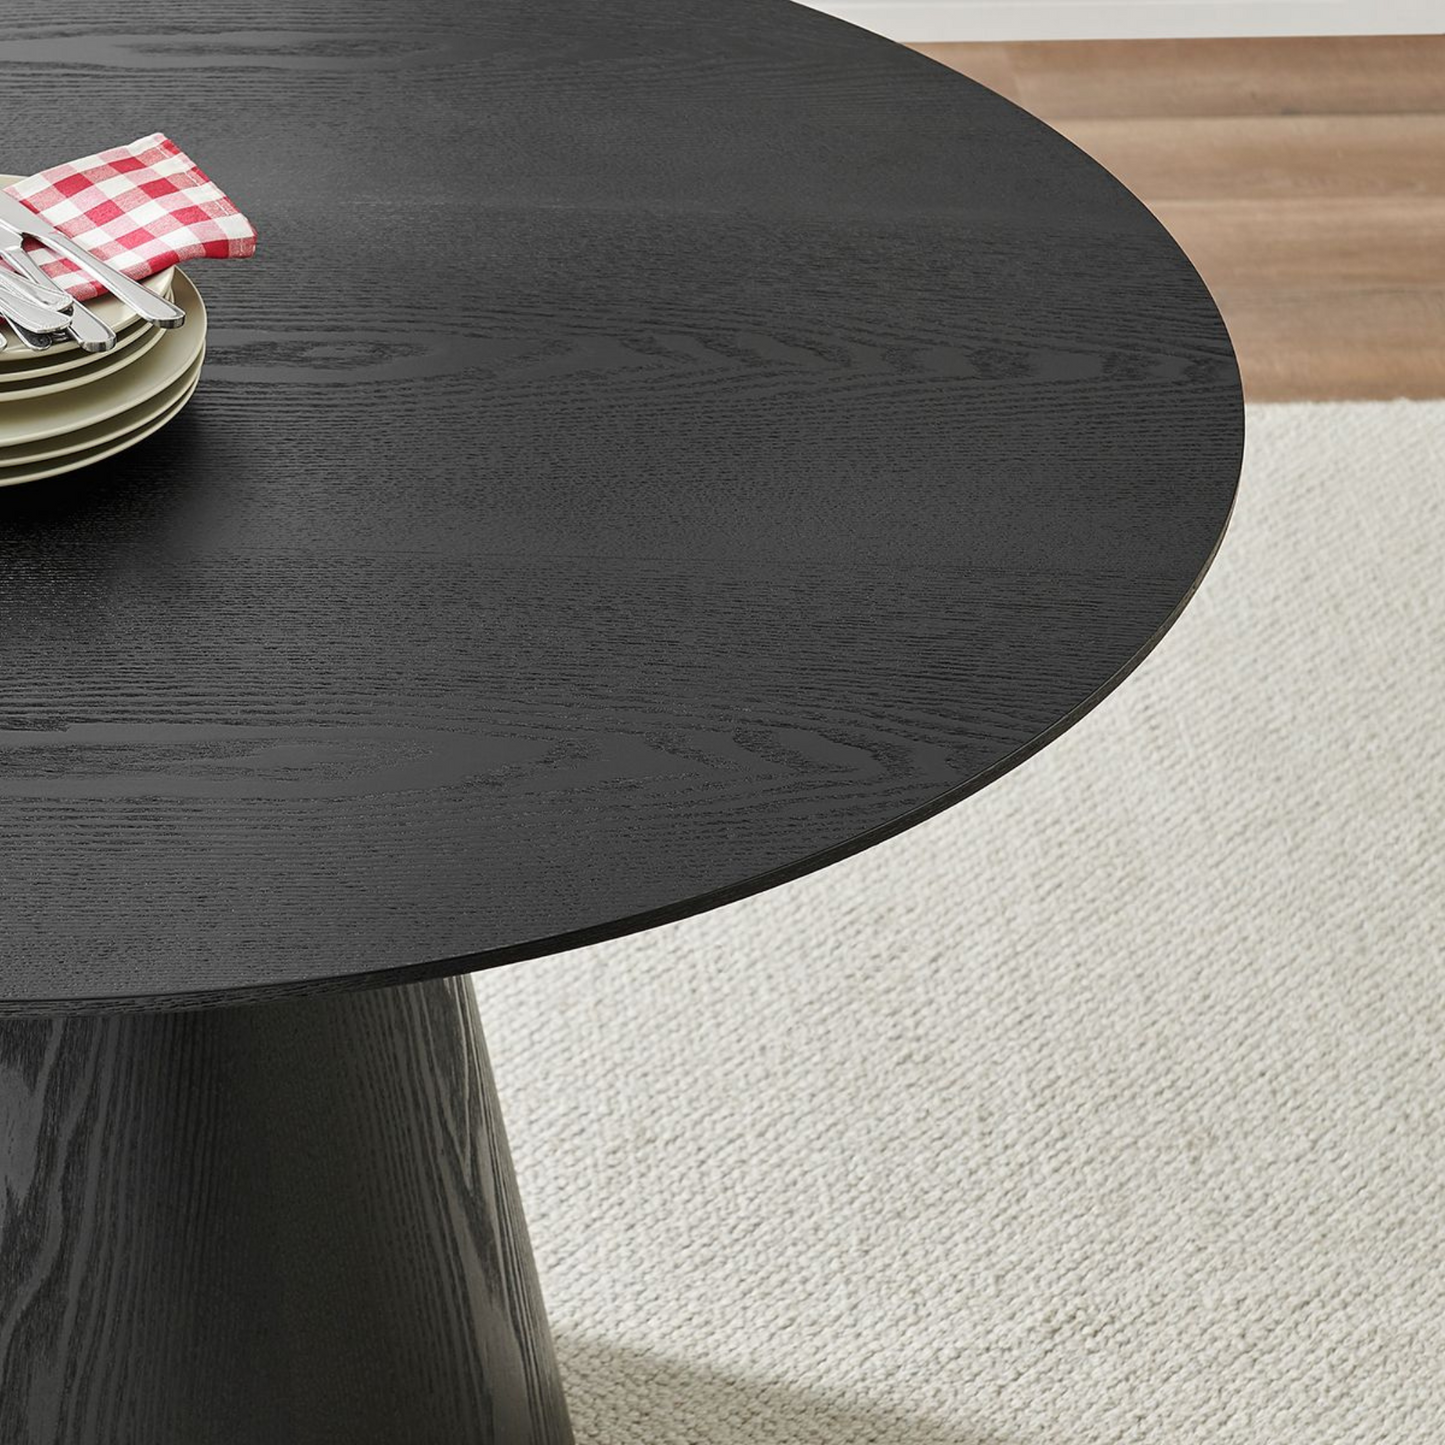 Black Round Wooden Dining Table with Wooden Base